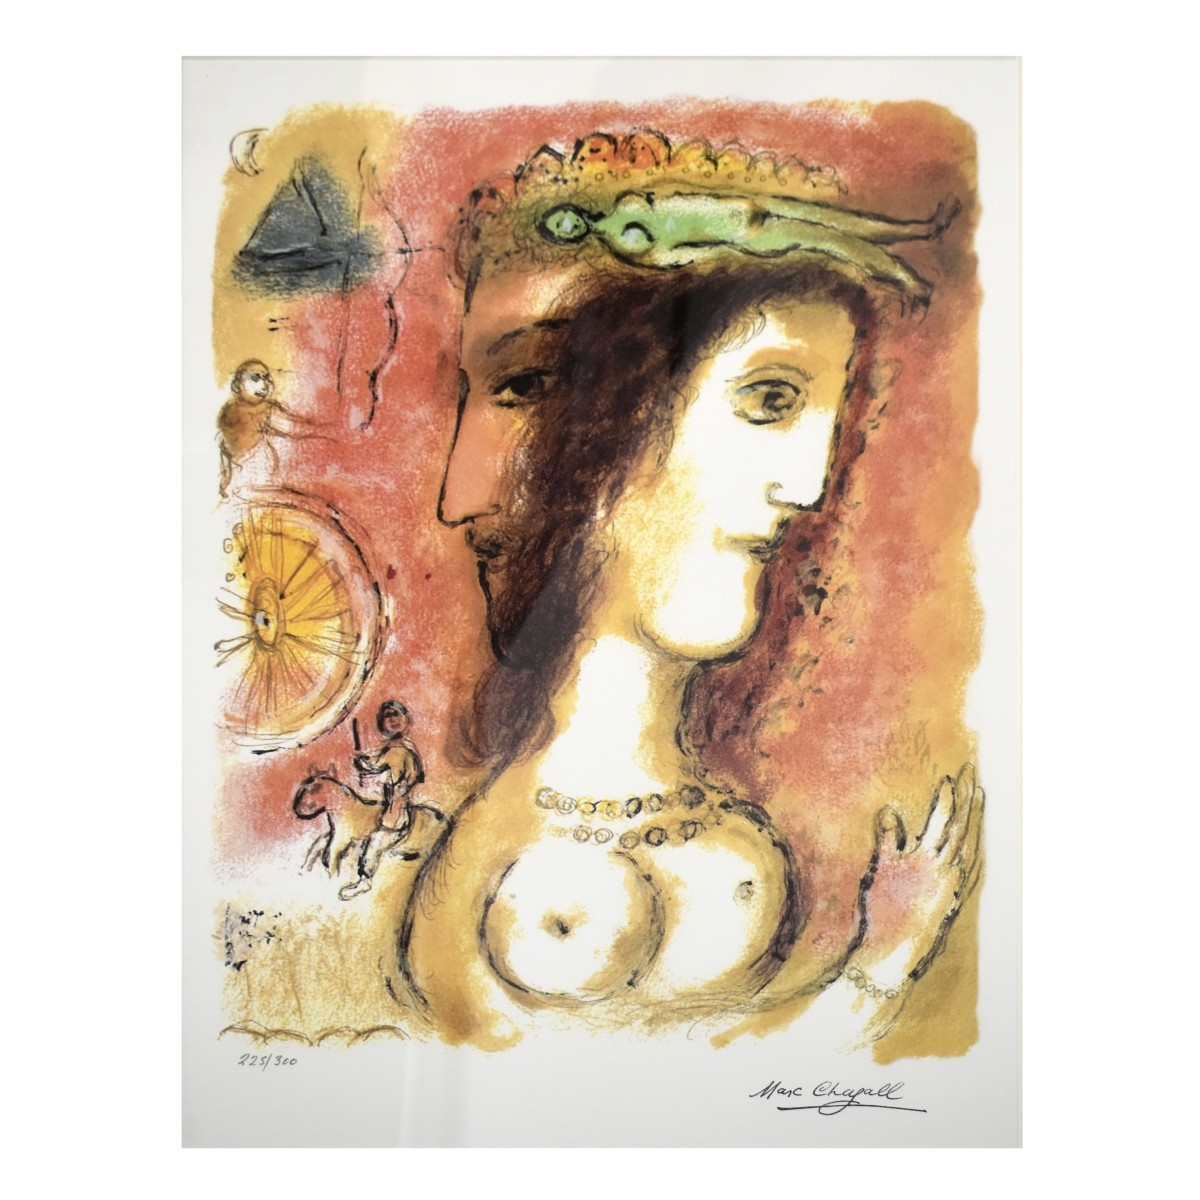 After: Marc Chagall, Russian/French (1887 - 1985)